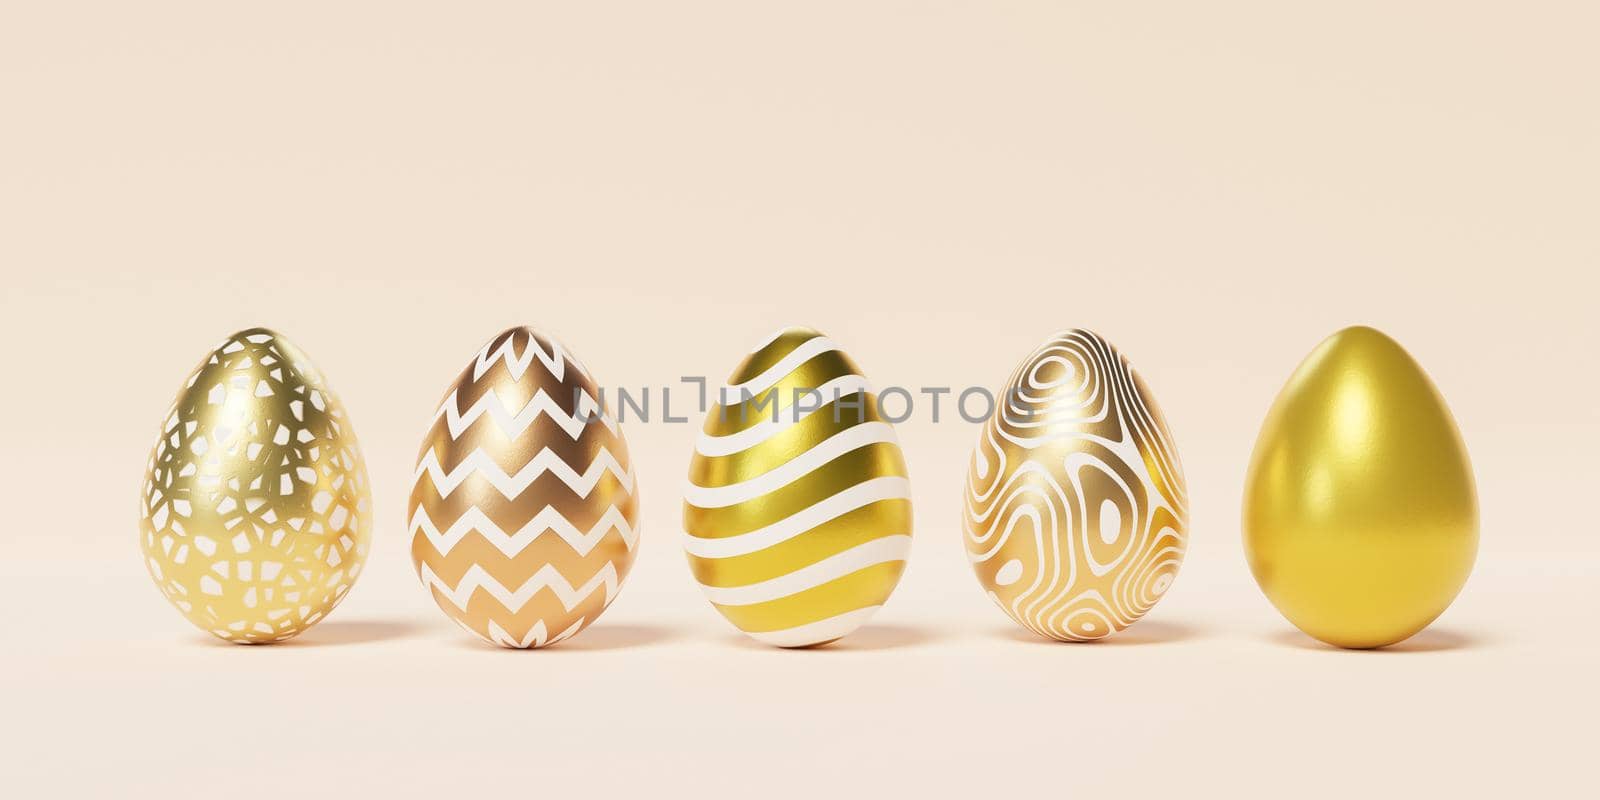 Set of Easter eggs decorated with golden textures and patterns on beige background, spring April holidays card, 3d illustration render